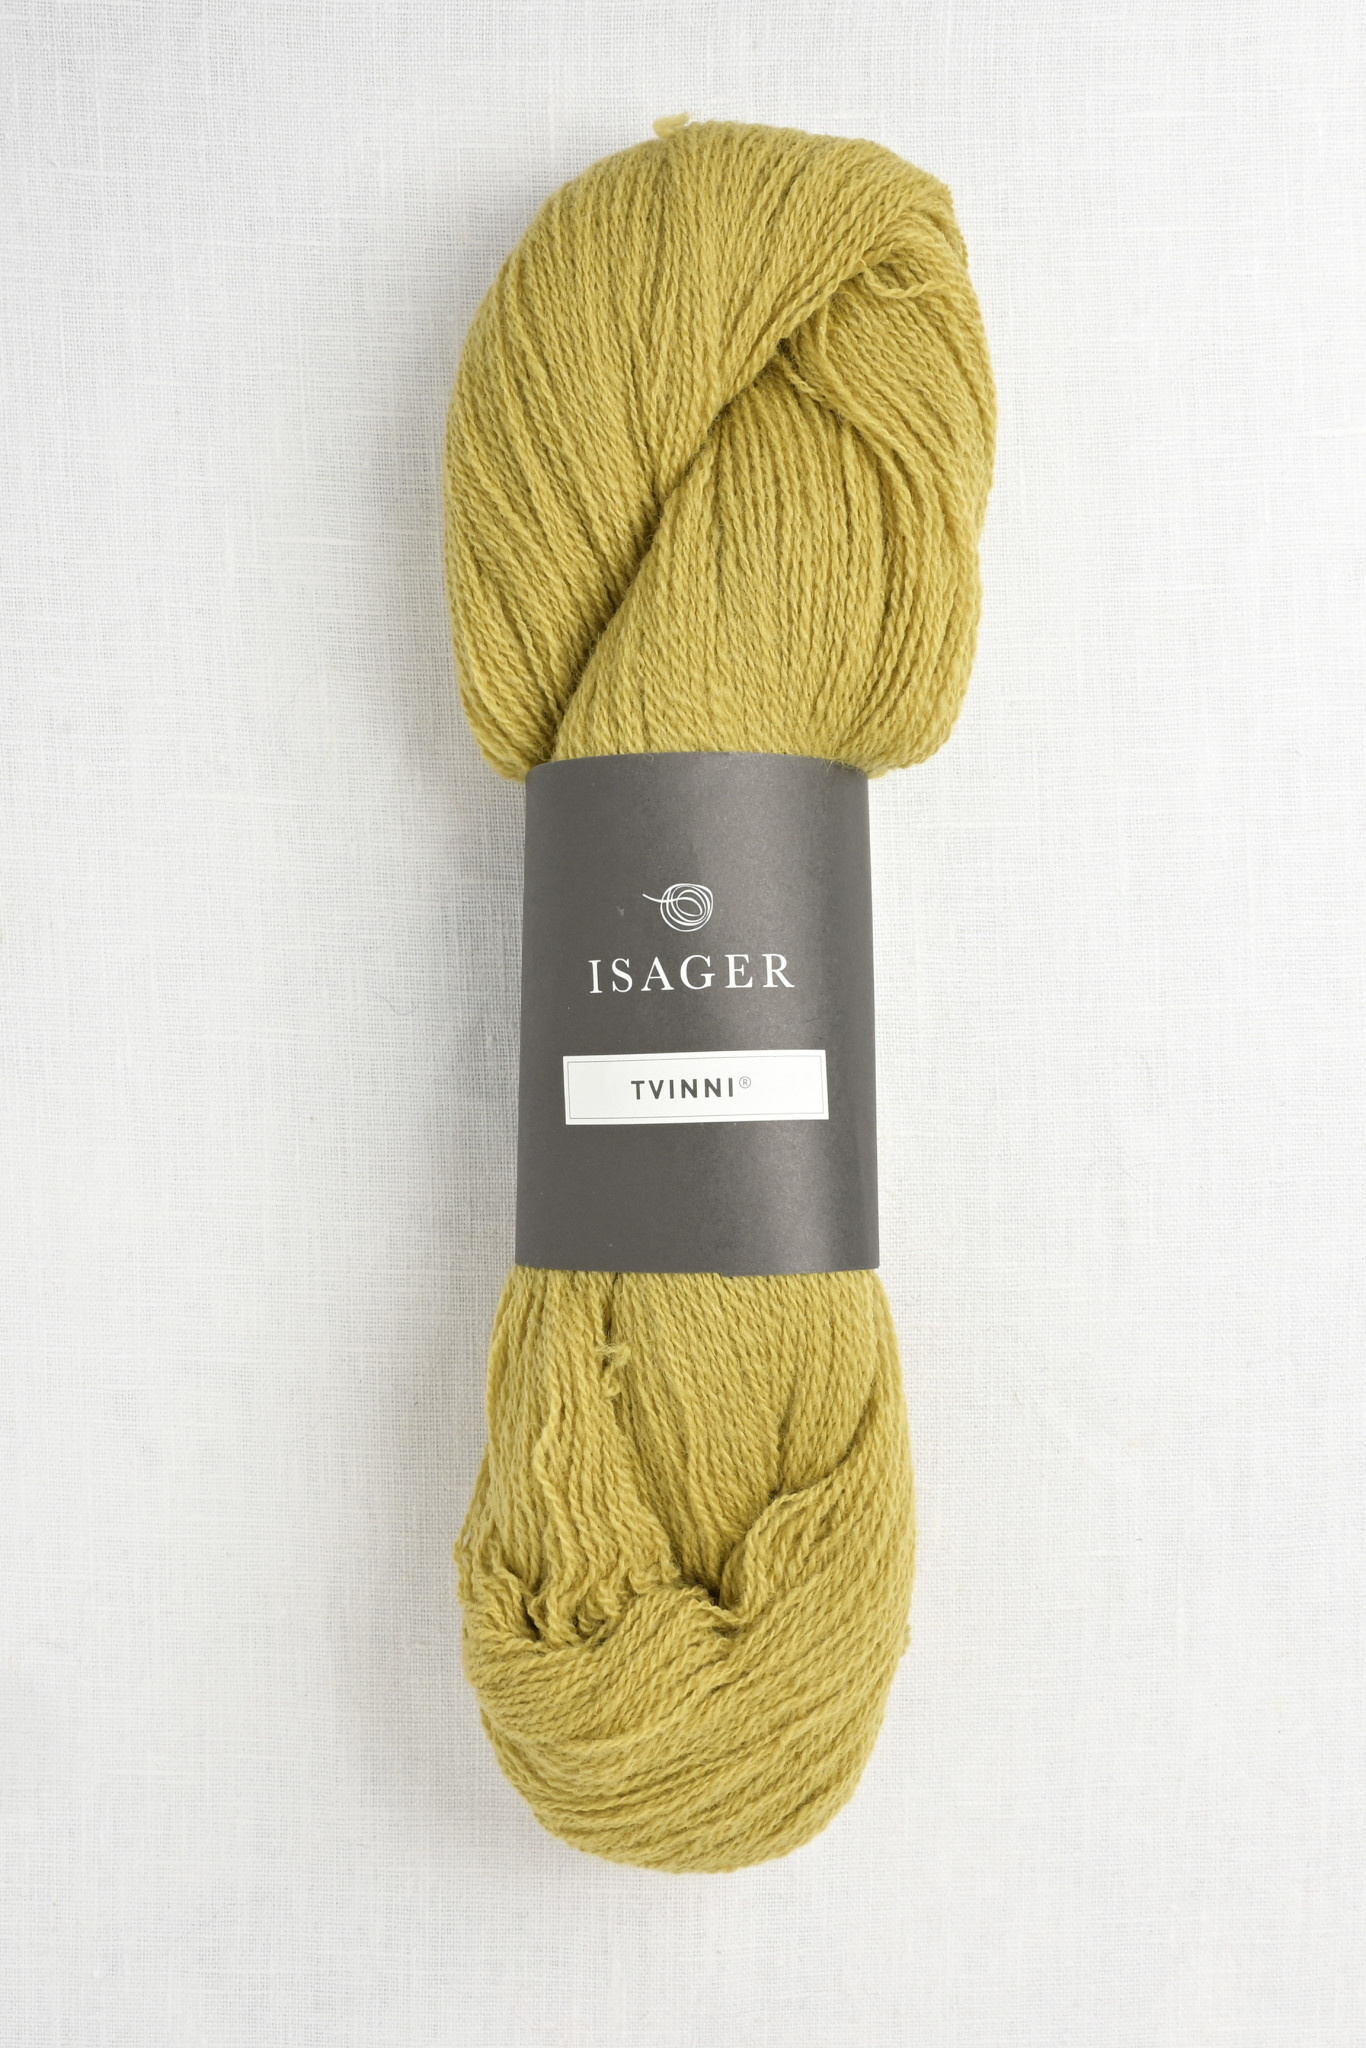 Isager Tvinni 40 Straw - Wool and Company Fine Yarn